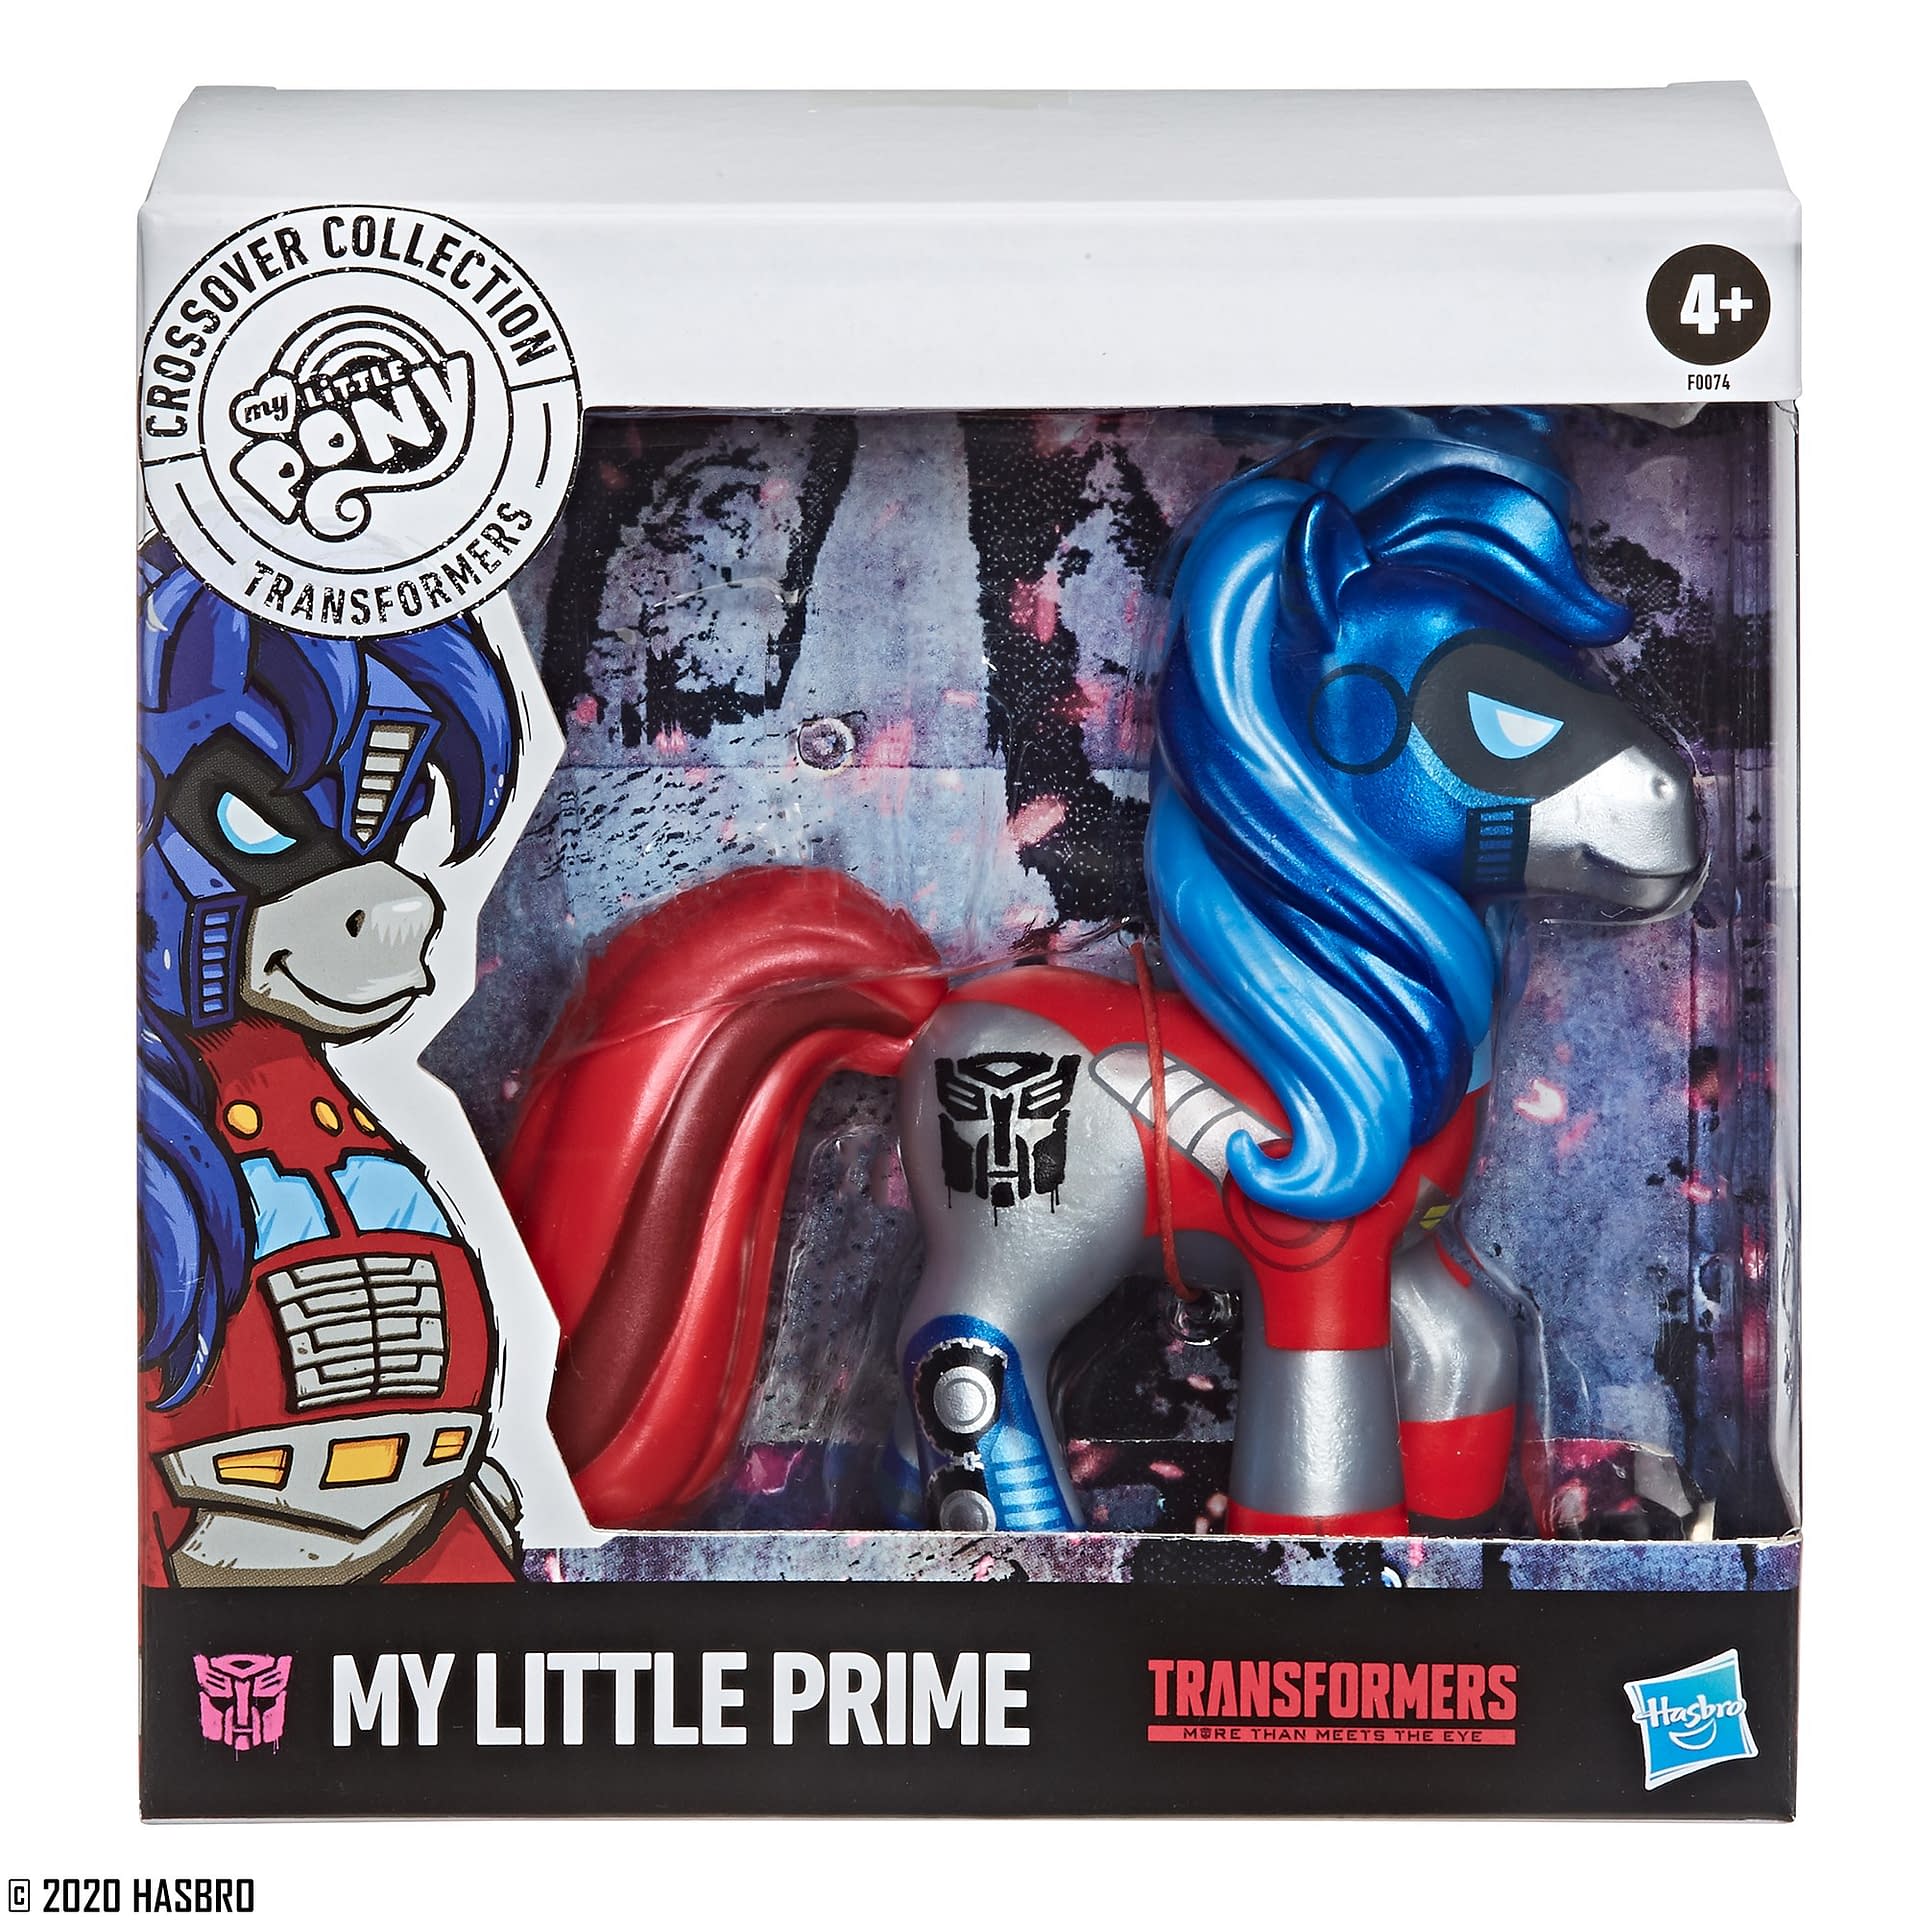 New My Little Pony Characters Revealed By Hasbro & Netflix